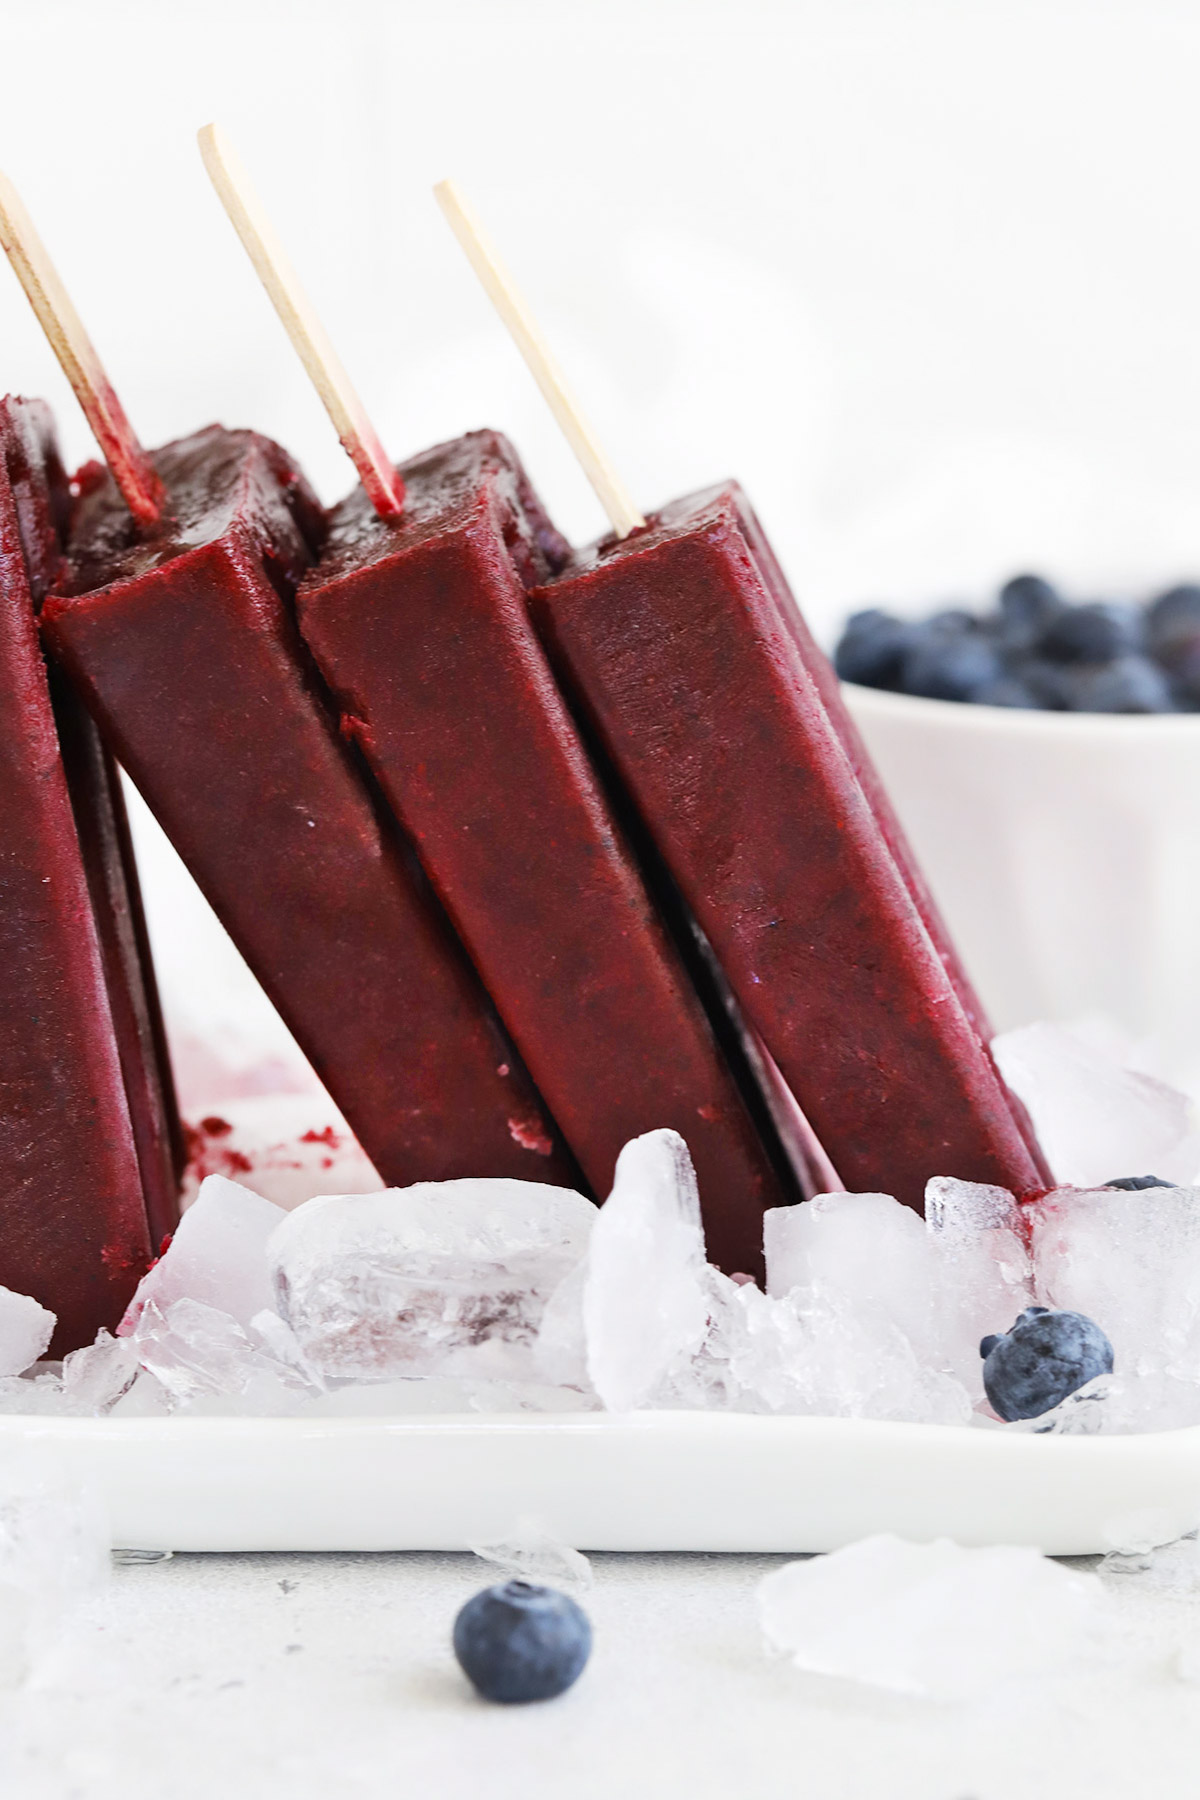 Front view of homemade blueberry pomegranate popsicles standing upright on a platter of ice